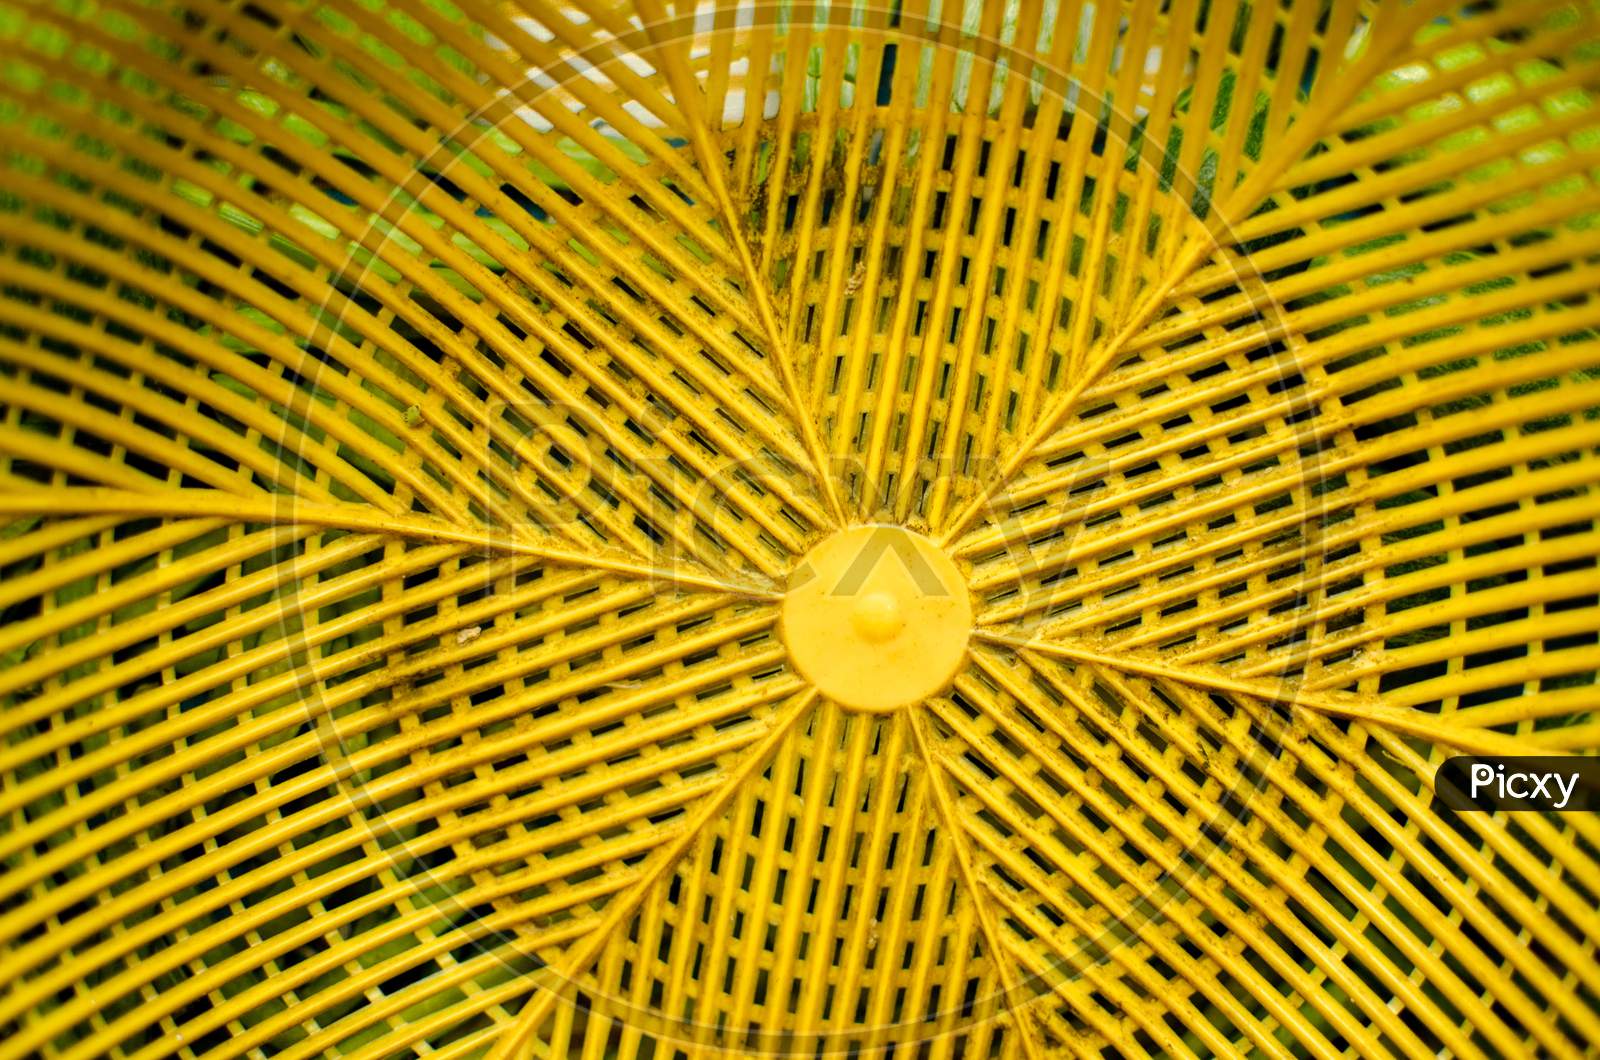 A Texture Of Yellow Vegetable Basket